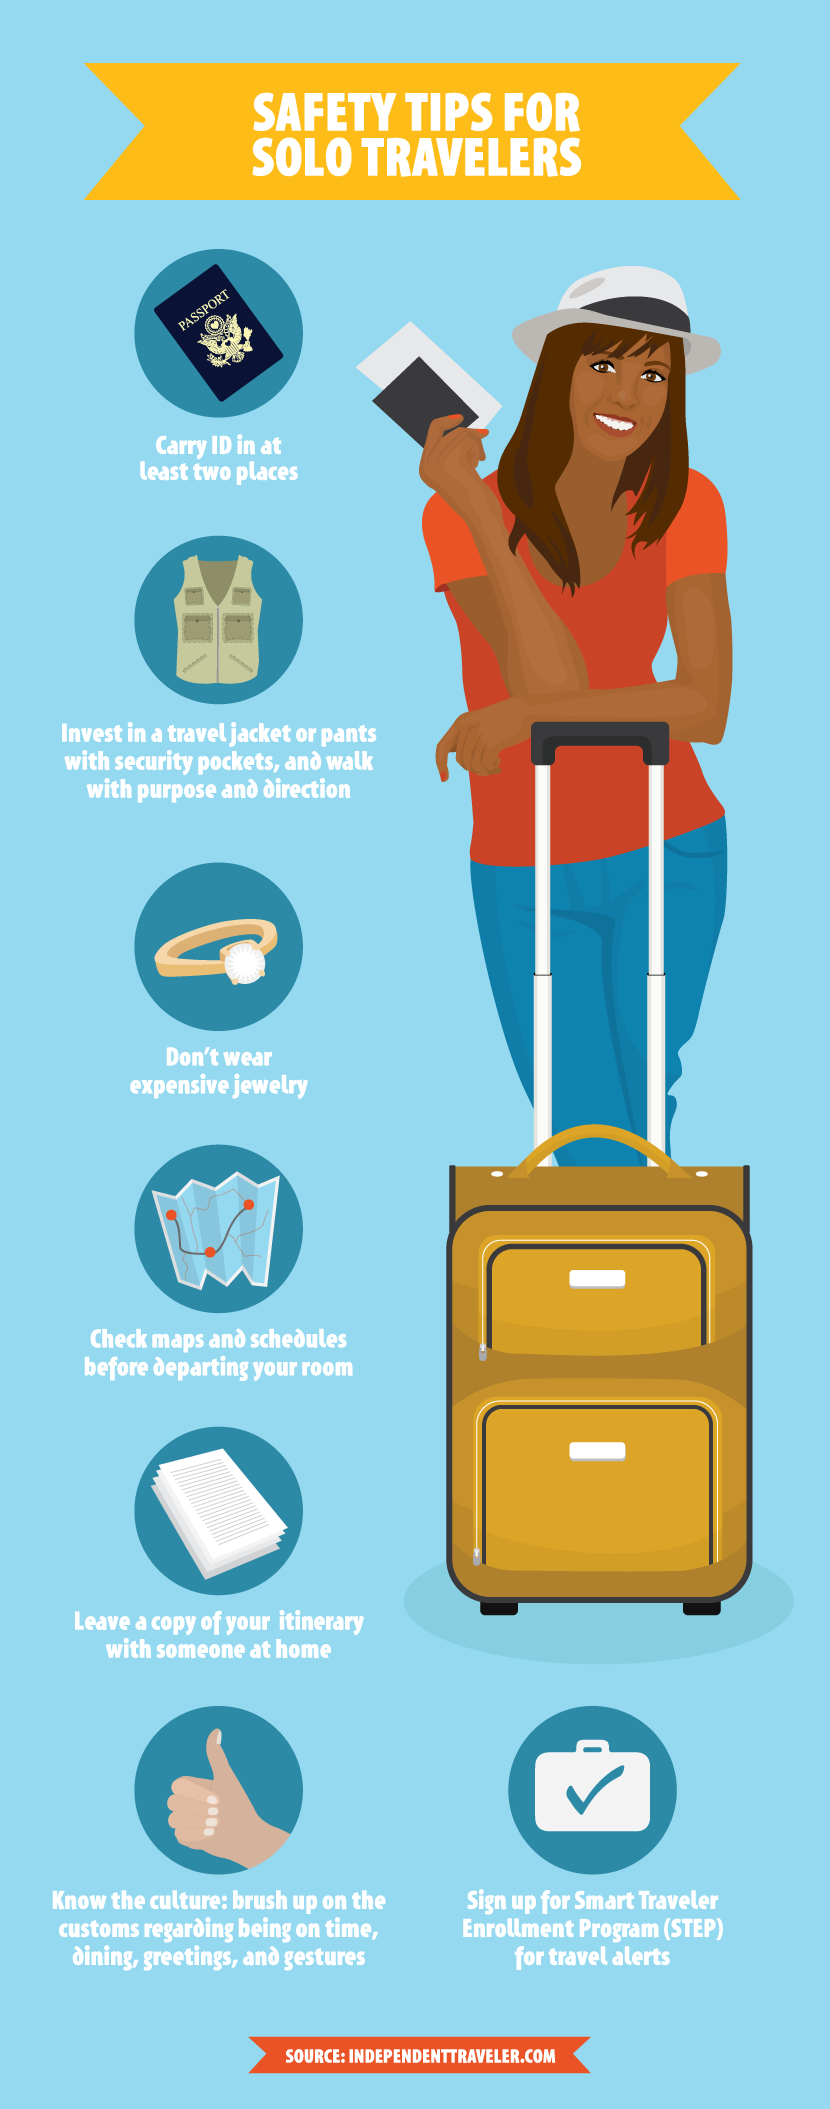 7 Travel Safety Tips - The Traveling Esquire